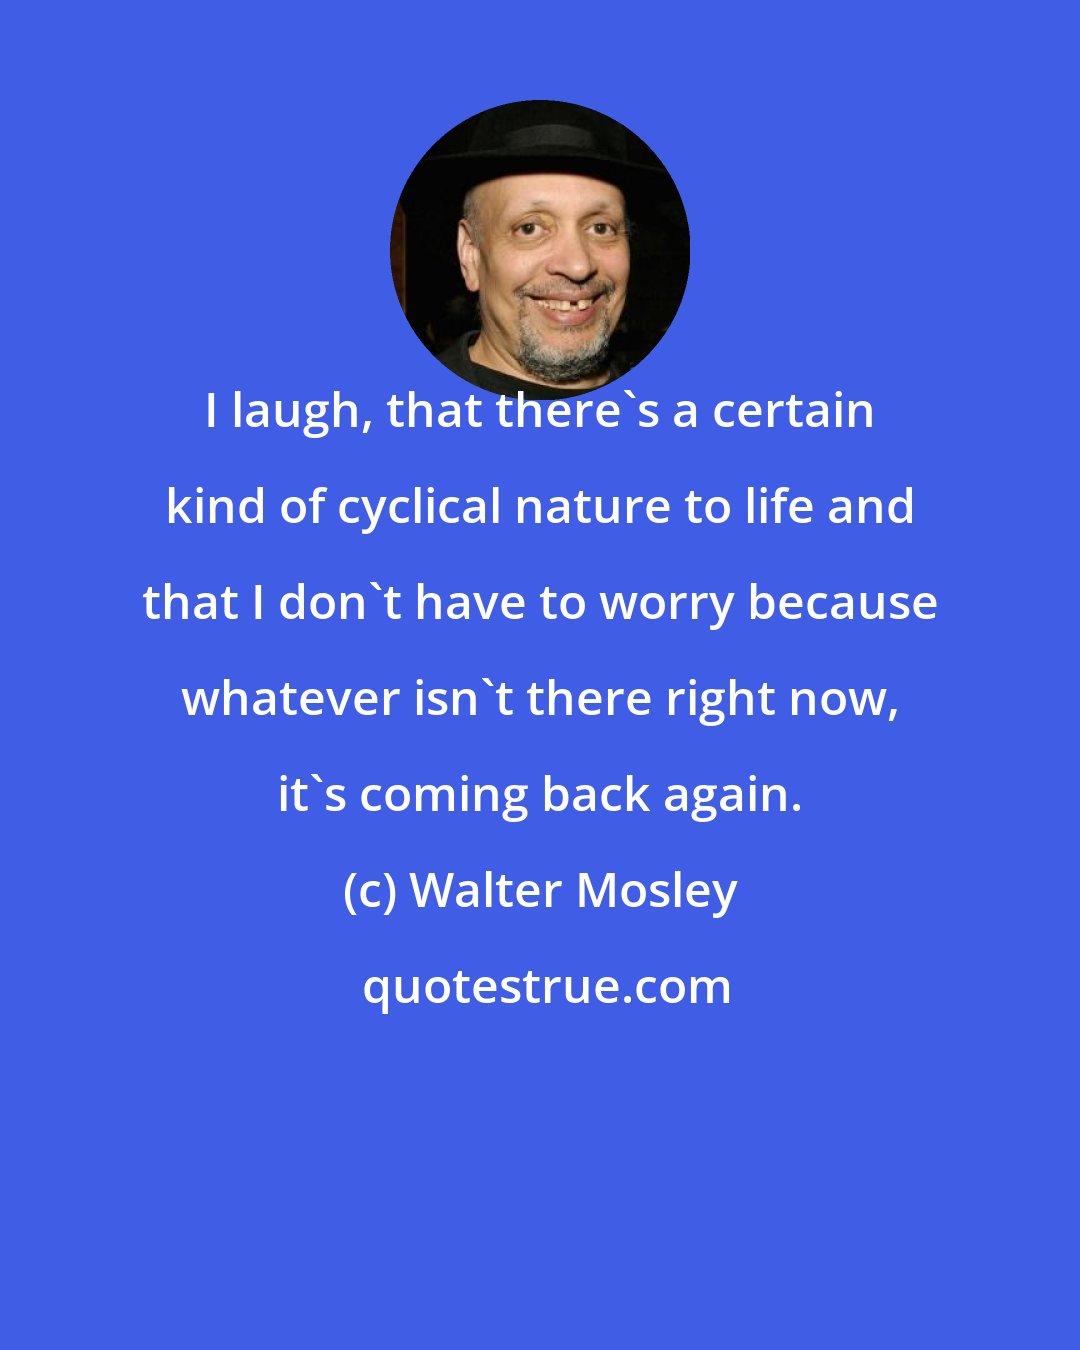 Walter Mosley: I laugh, that there's a certain kind of cyclical nature to life and that I don't have to worry because whatever isn't there right now, it's coming back again.